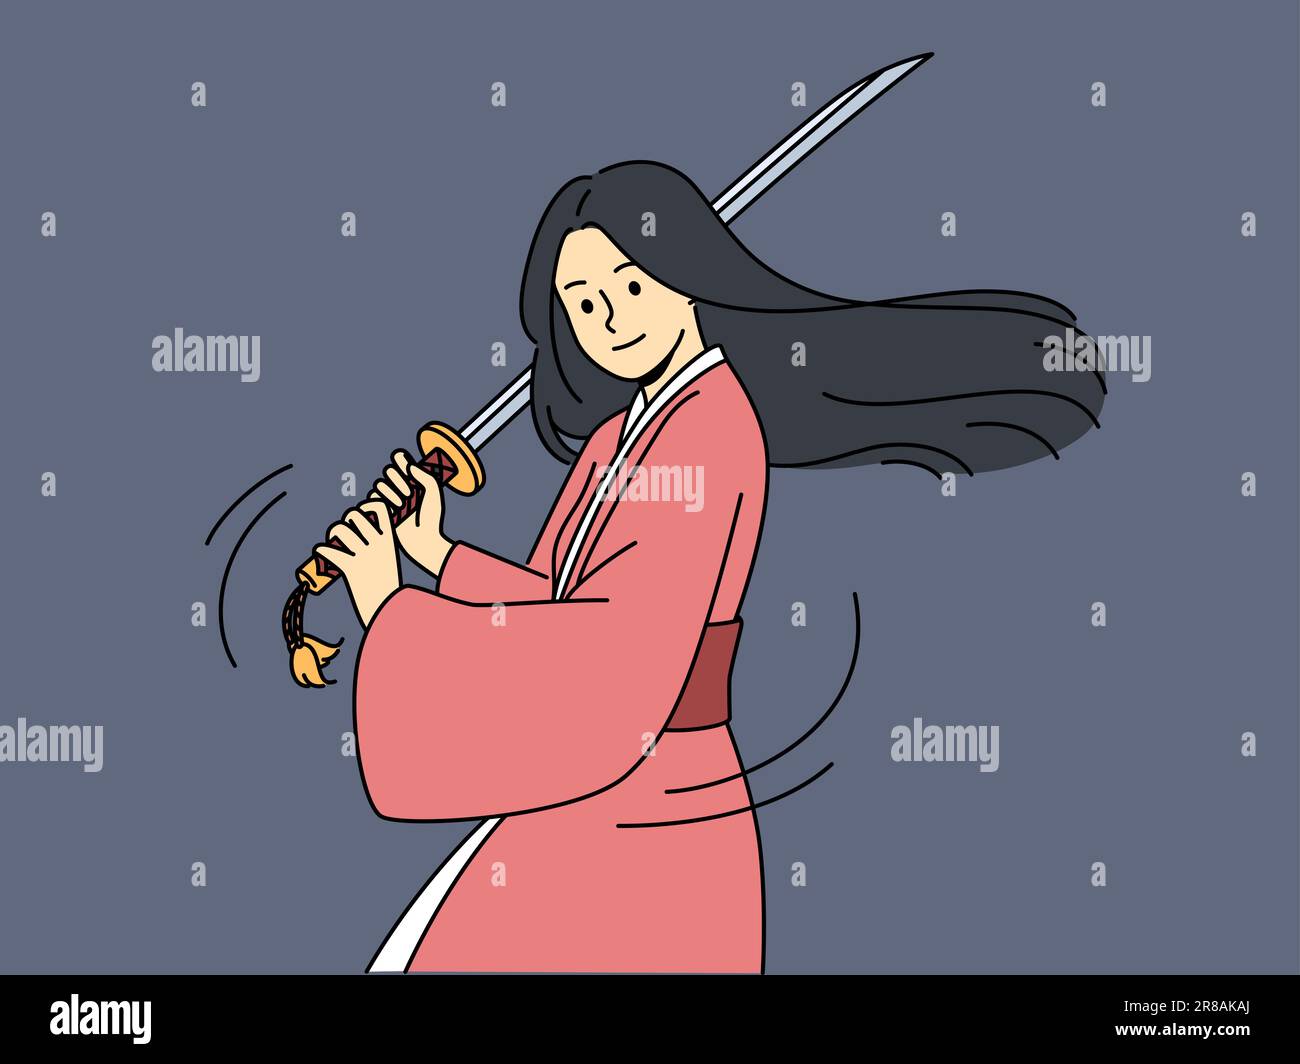 Woman samurai with katana knows asian martial arts and trains willing to compete. Long-haired samurai girl holding long sword is dressed in kimono for battles between japanese ninjas. Stock Vector